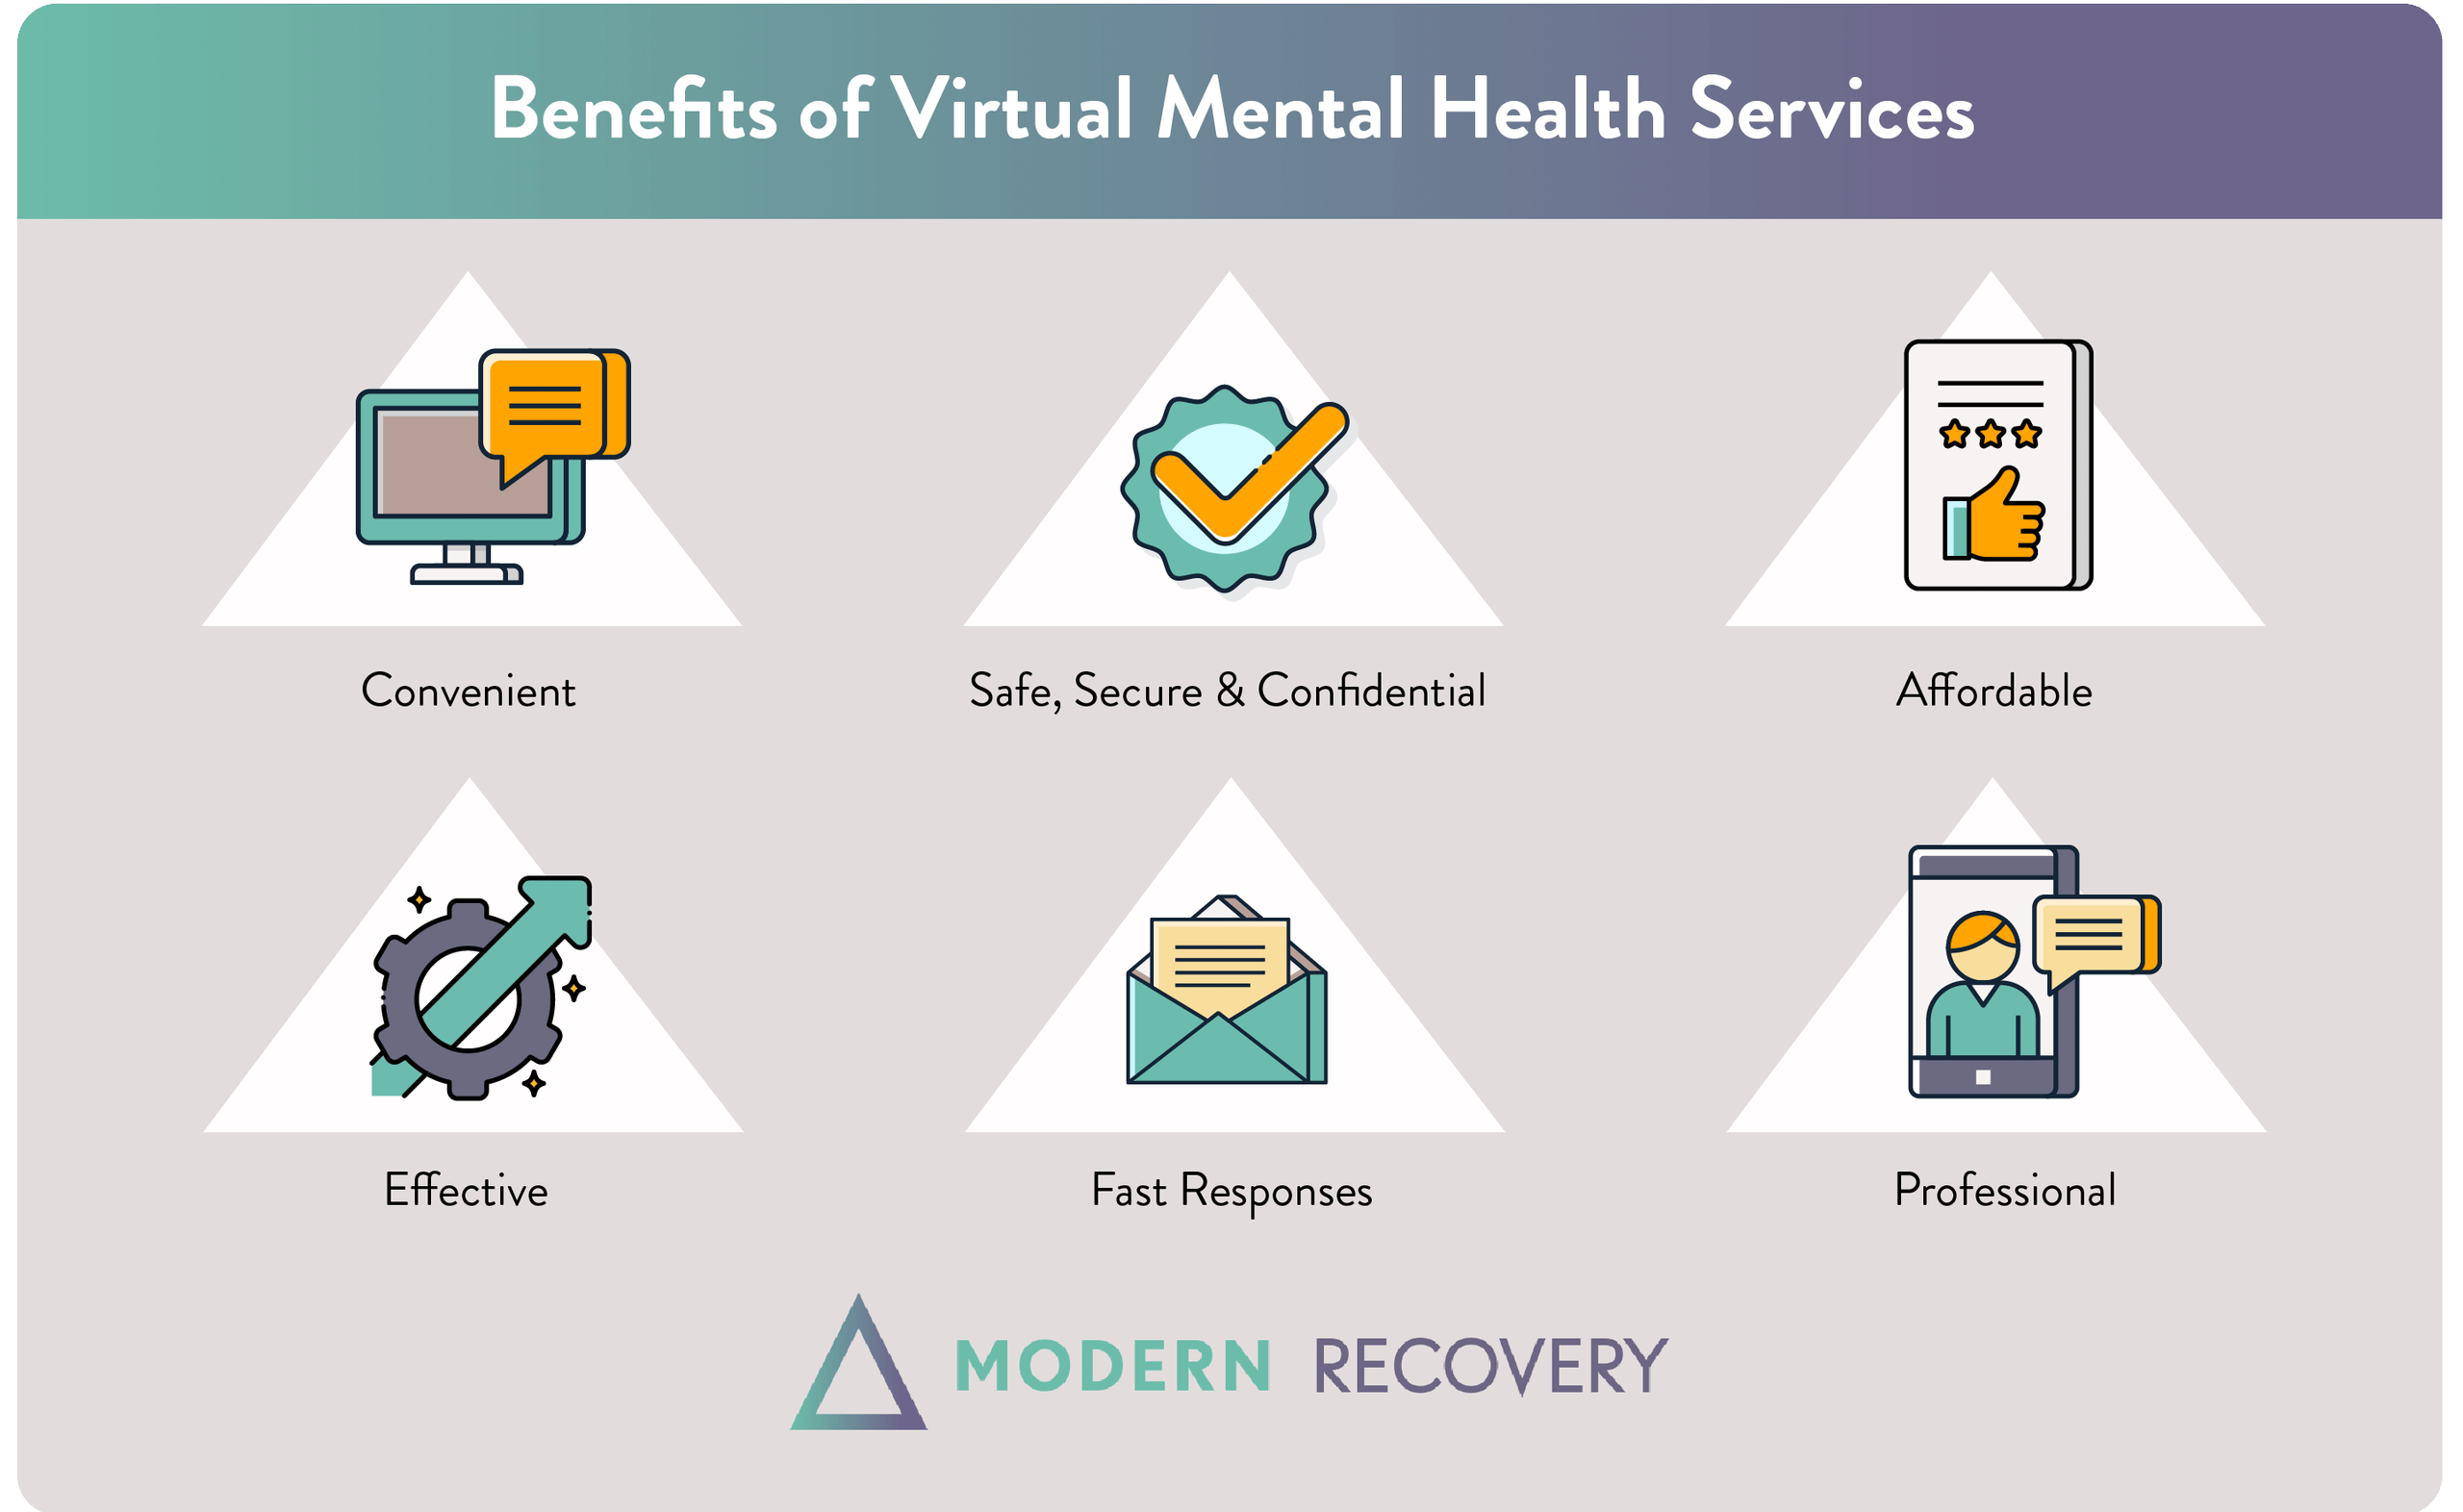 Benefits of Virtual Mental Health Services